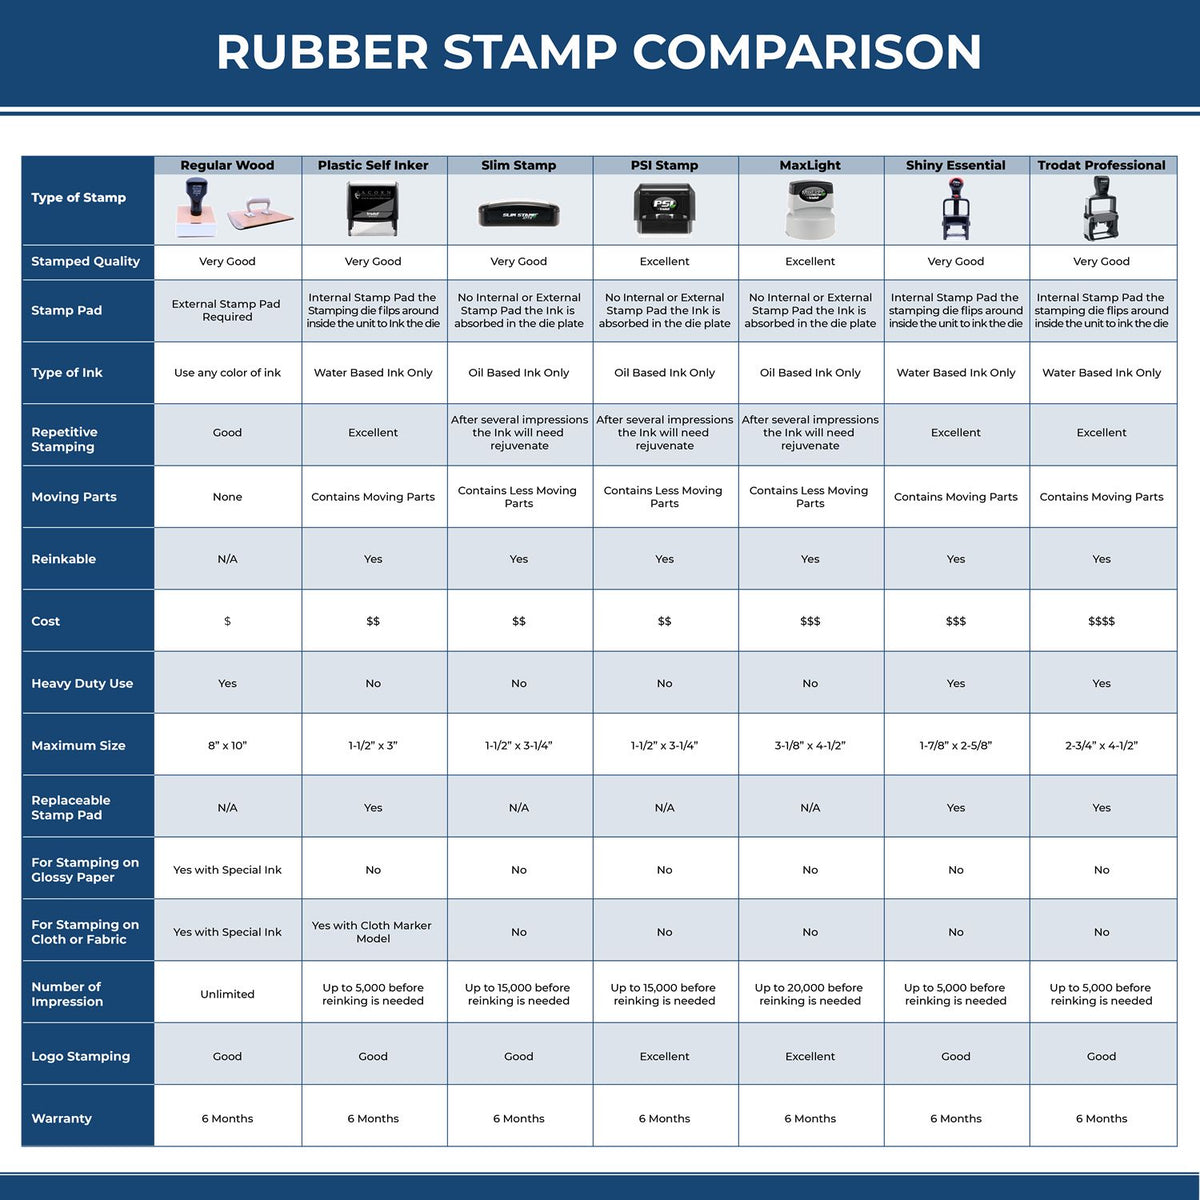 A comparison chart for the different types of mount models available for the Wooden Handle Indiana Rectangular Notary Public Stamp.